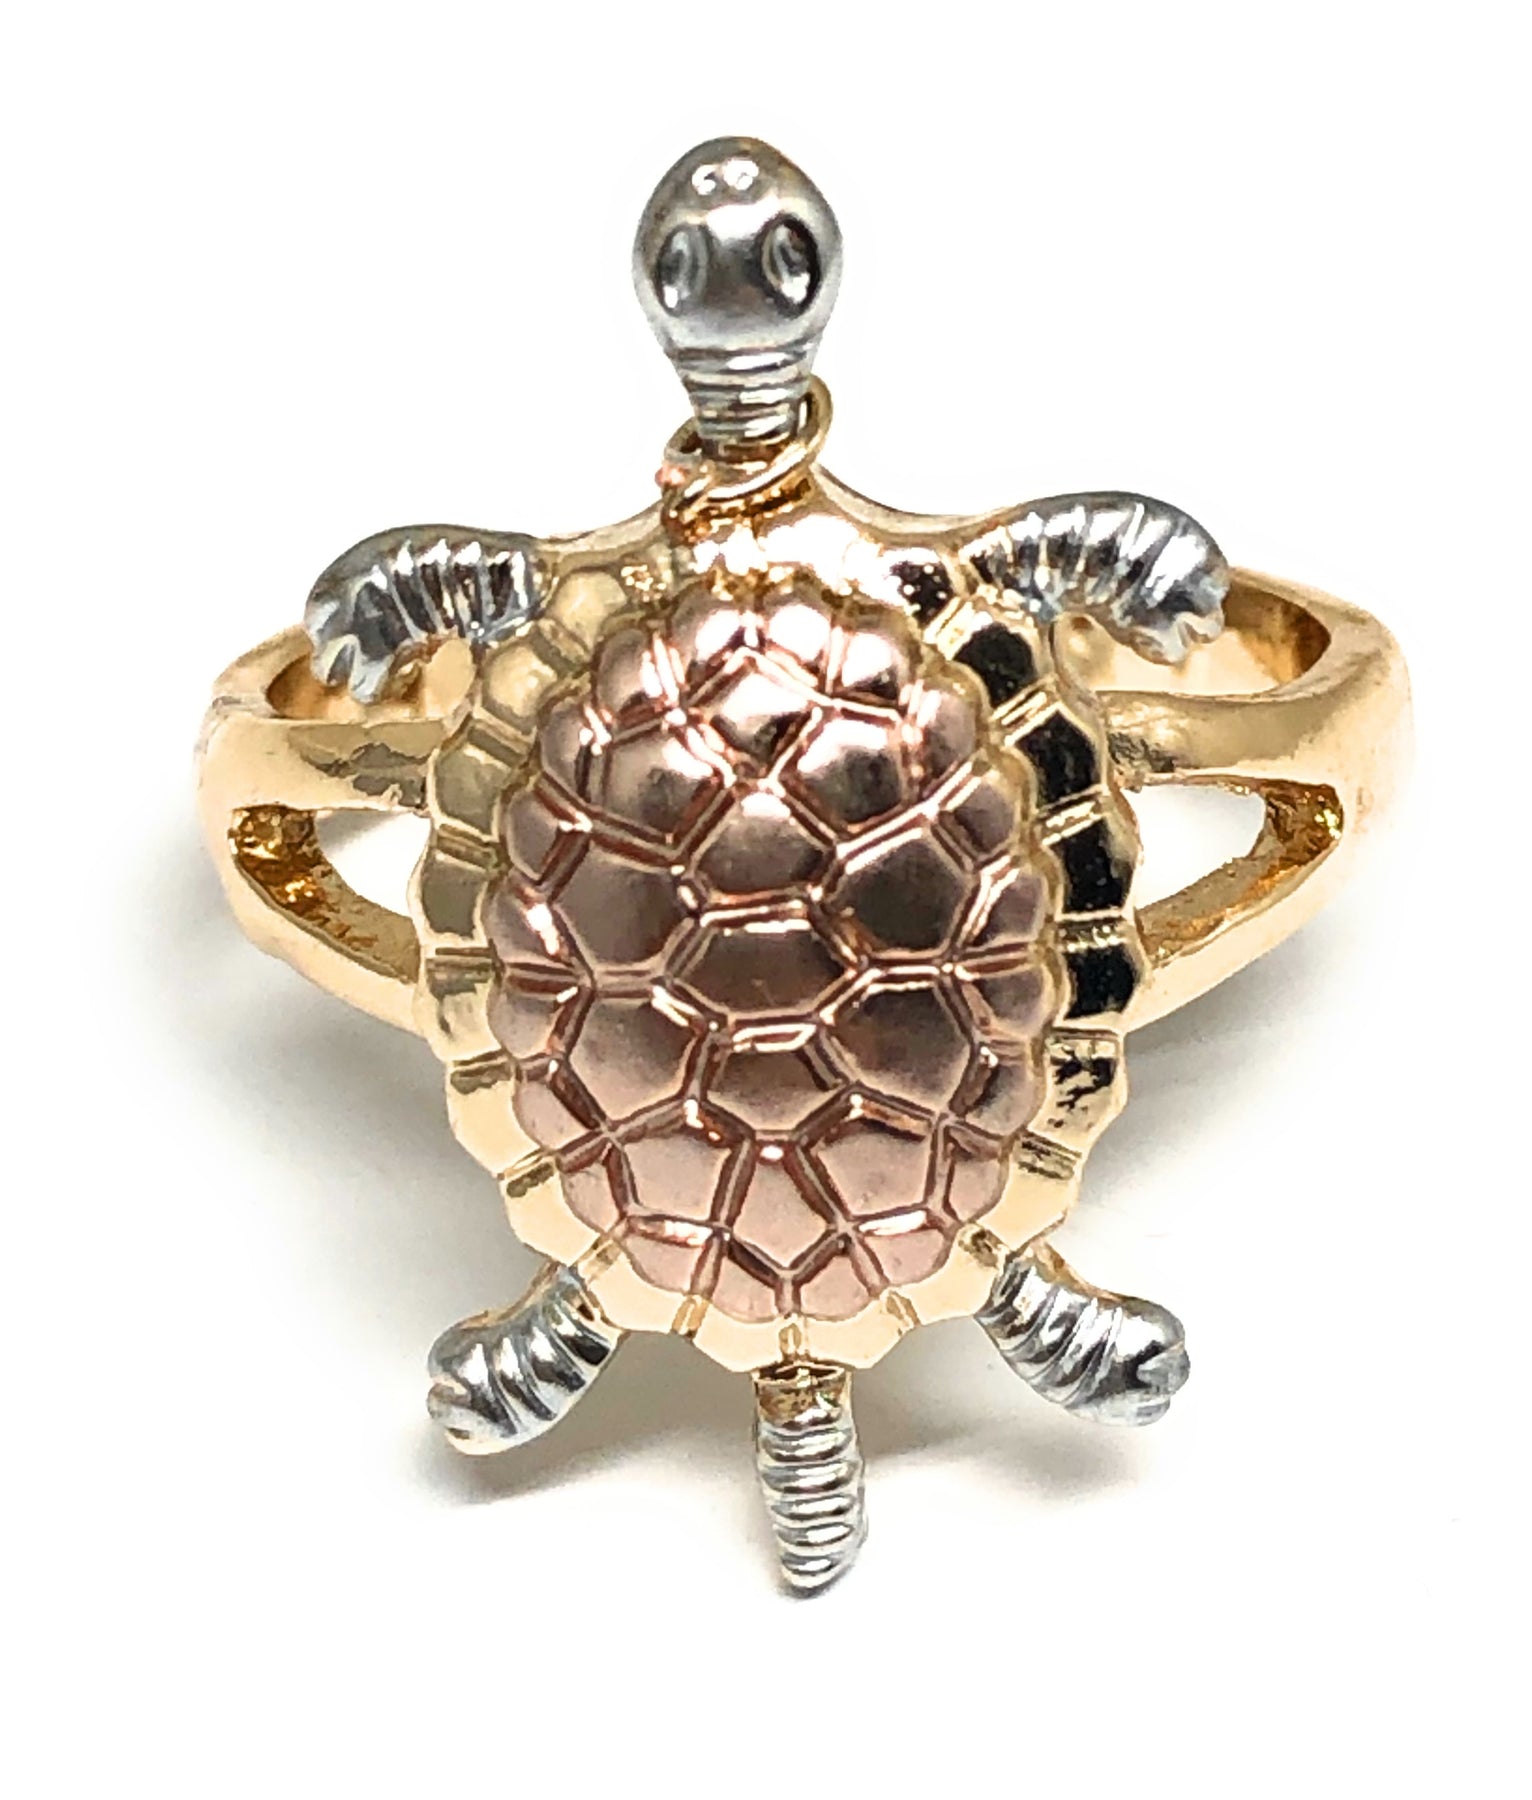 Turtle With Diamond Sophisticated Design Gold Plated Ring For Men - Style  B035 at Rs 450.00 | Rajkot| ID: 27532228162